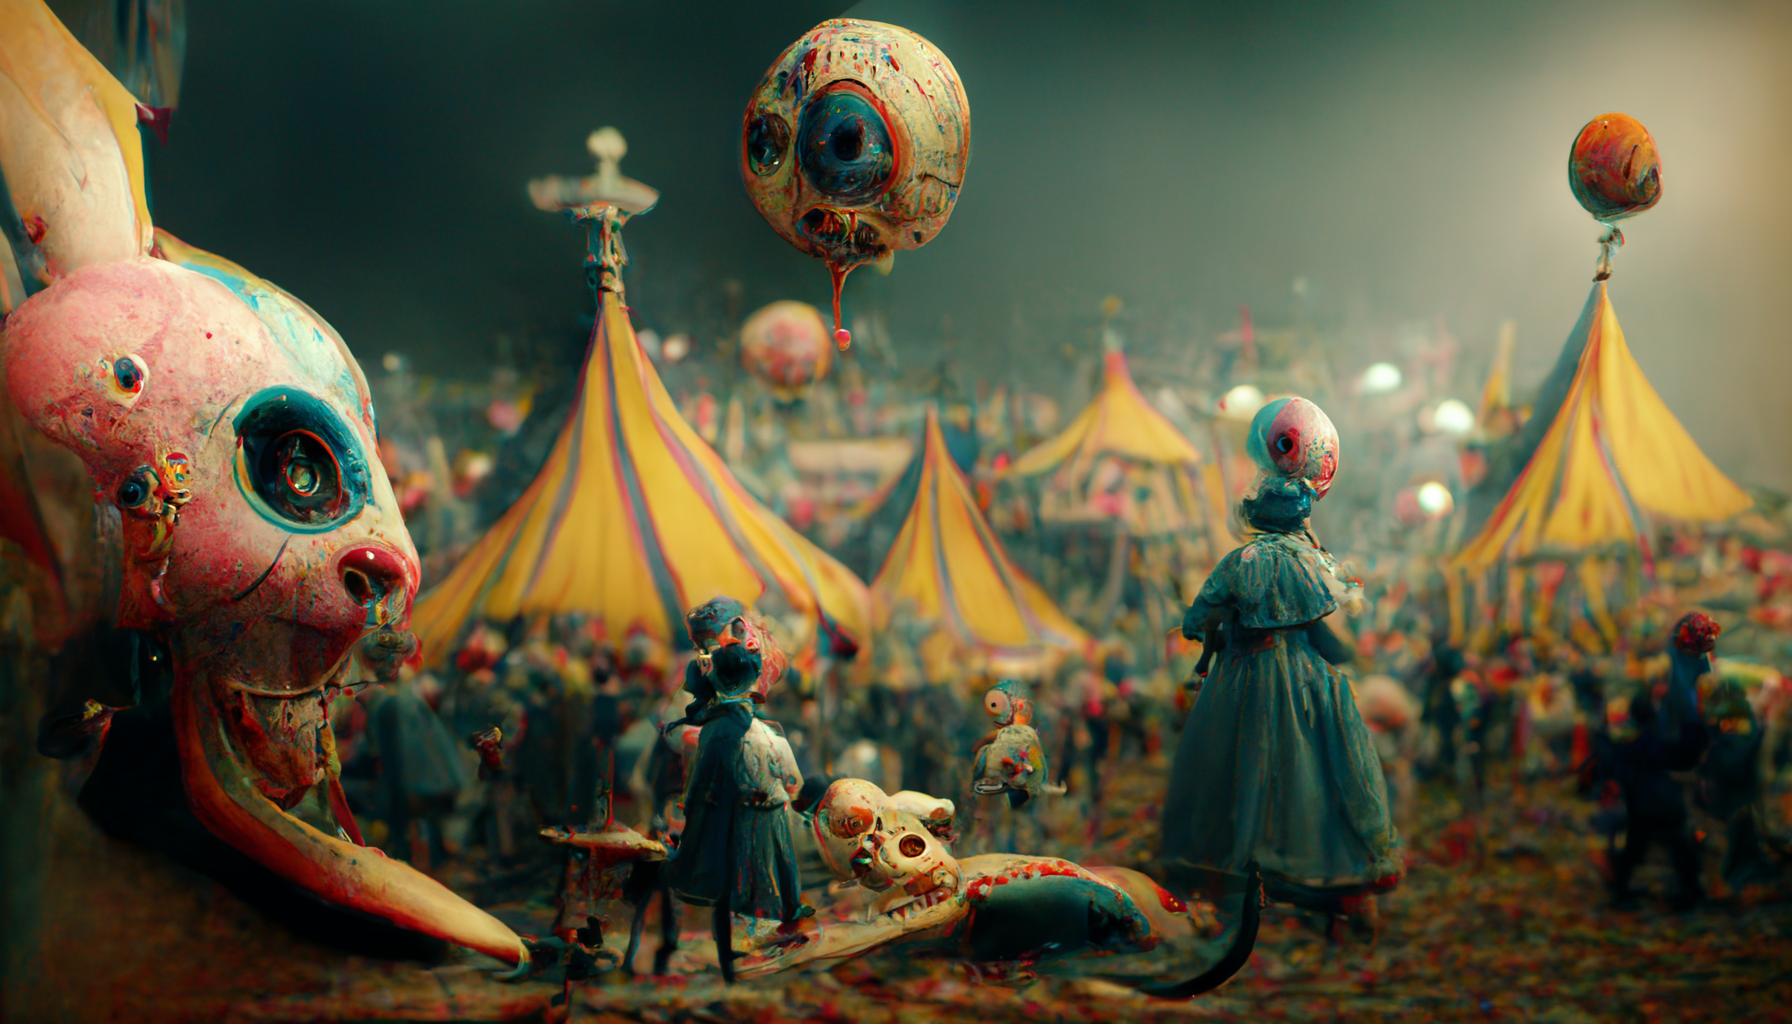 ZenithWombat_Surreal_carnival_games_with_humans_and_monsters_in_18c5c720-8db5-4cea-8b09-0d33df5829e2.png